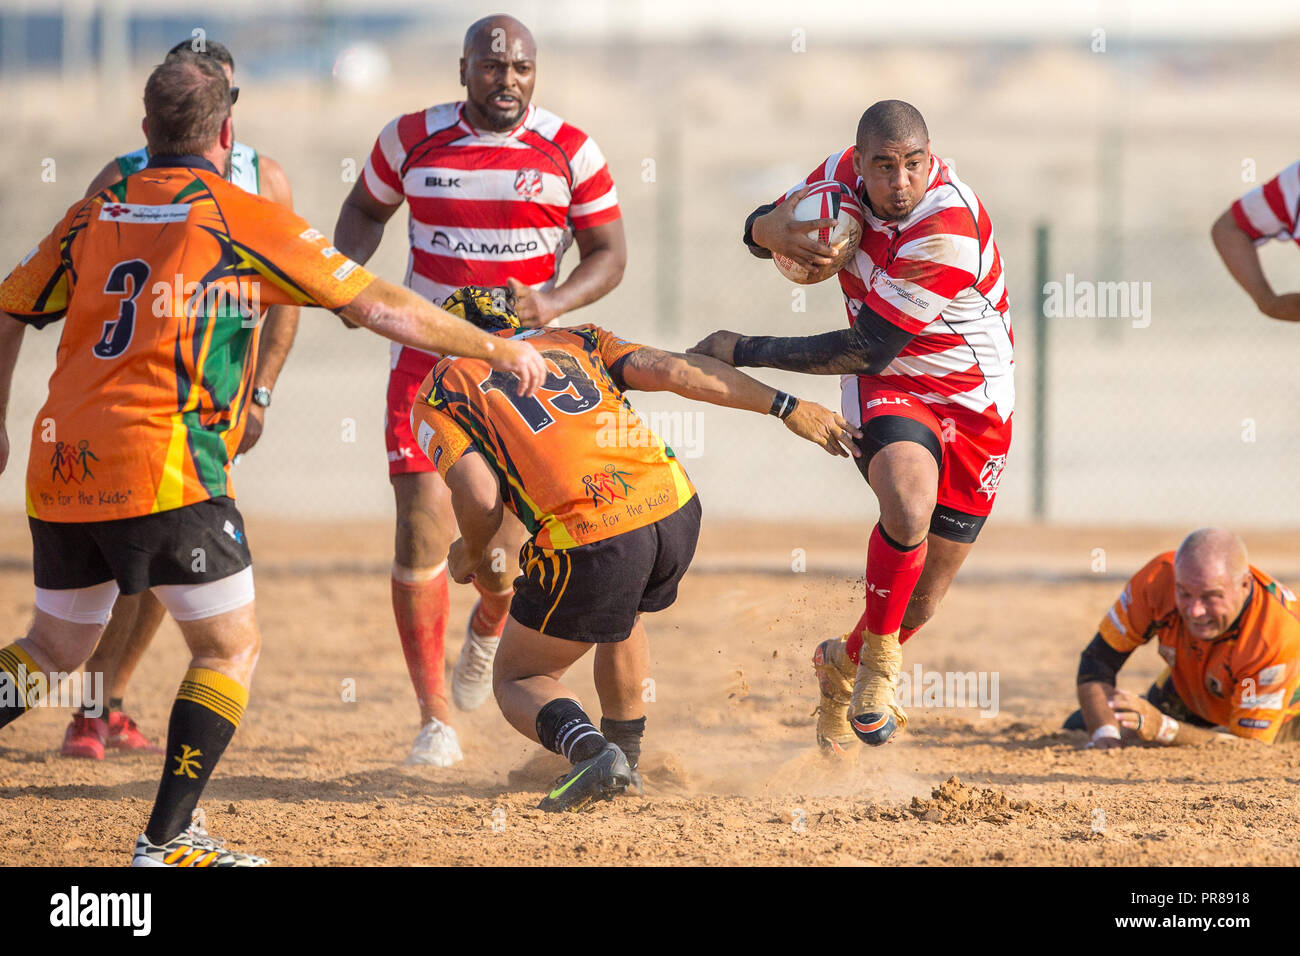 December 16, 2016 - Ras Al Khaimah, Ras Al Khaimah, United Arab Emirates -  Team players seen in action at their sand pitch during the game.Rugby in  RAK has been reported to